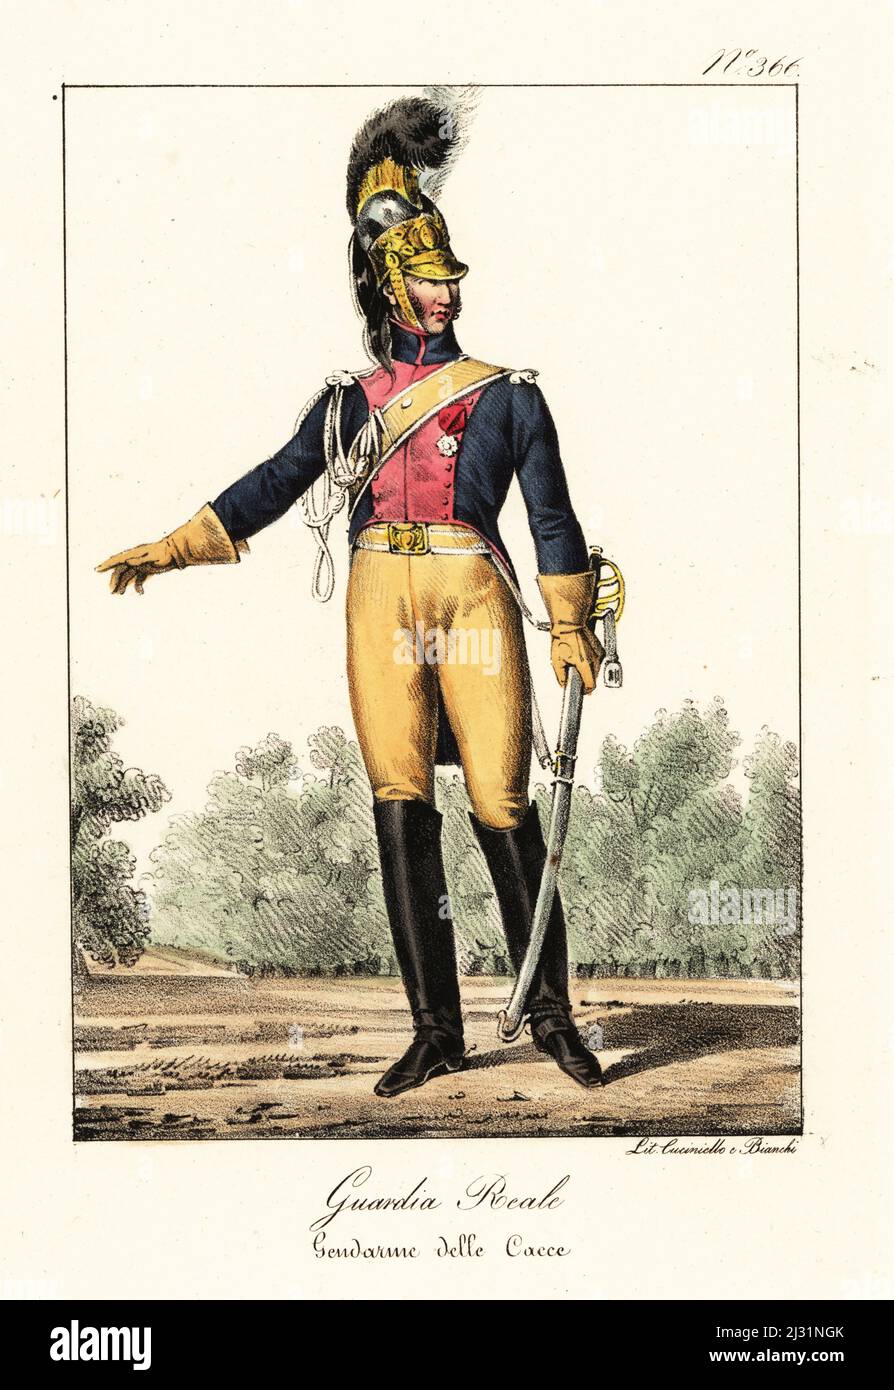 Uniform of a cavalry man of the Royal Guard, Gendarmerie de la Chasse. Guardsman in crested dragoon's helmet,  blue coat, red lapels, buff breeches and gloves, boots and sabre. Bourbon Restoration, 1814. Garde Royale, Gendarme des Chasses. Handcoloured lithograph by Lorenzo Bianchi and Domenico Cuciniello after Hippolyte Lecomte from Costumi civili e militari della monarchia francese dal 1200 al 1820, Naples, 1825. Italian edition of Lecomte’s Civilian and military costumes of the French monarchy from 1200 to 1820. Stock Photo